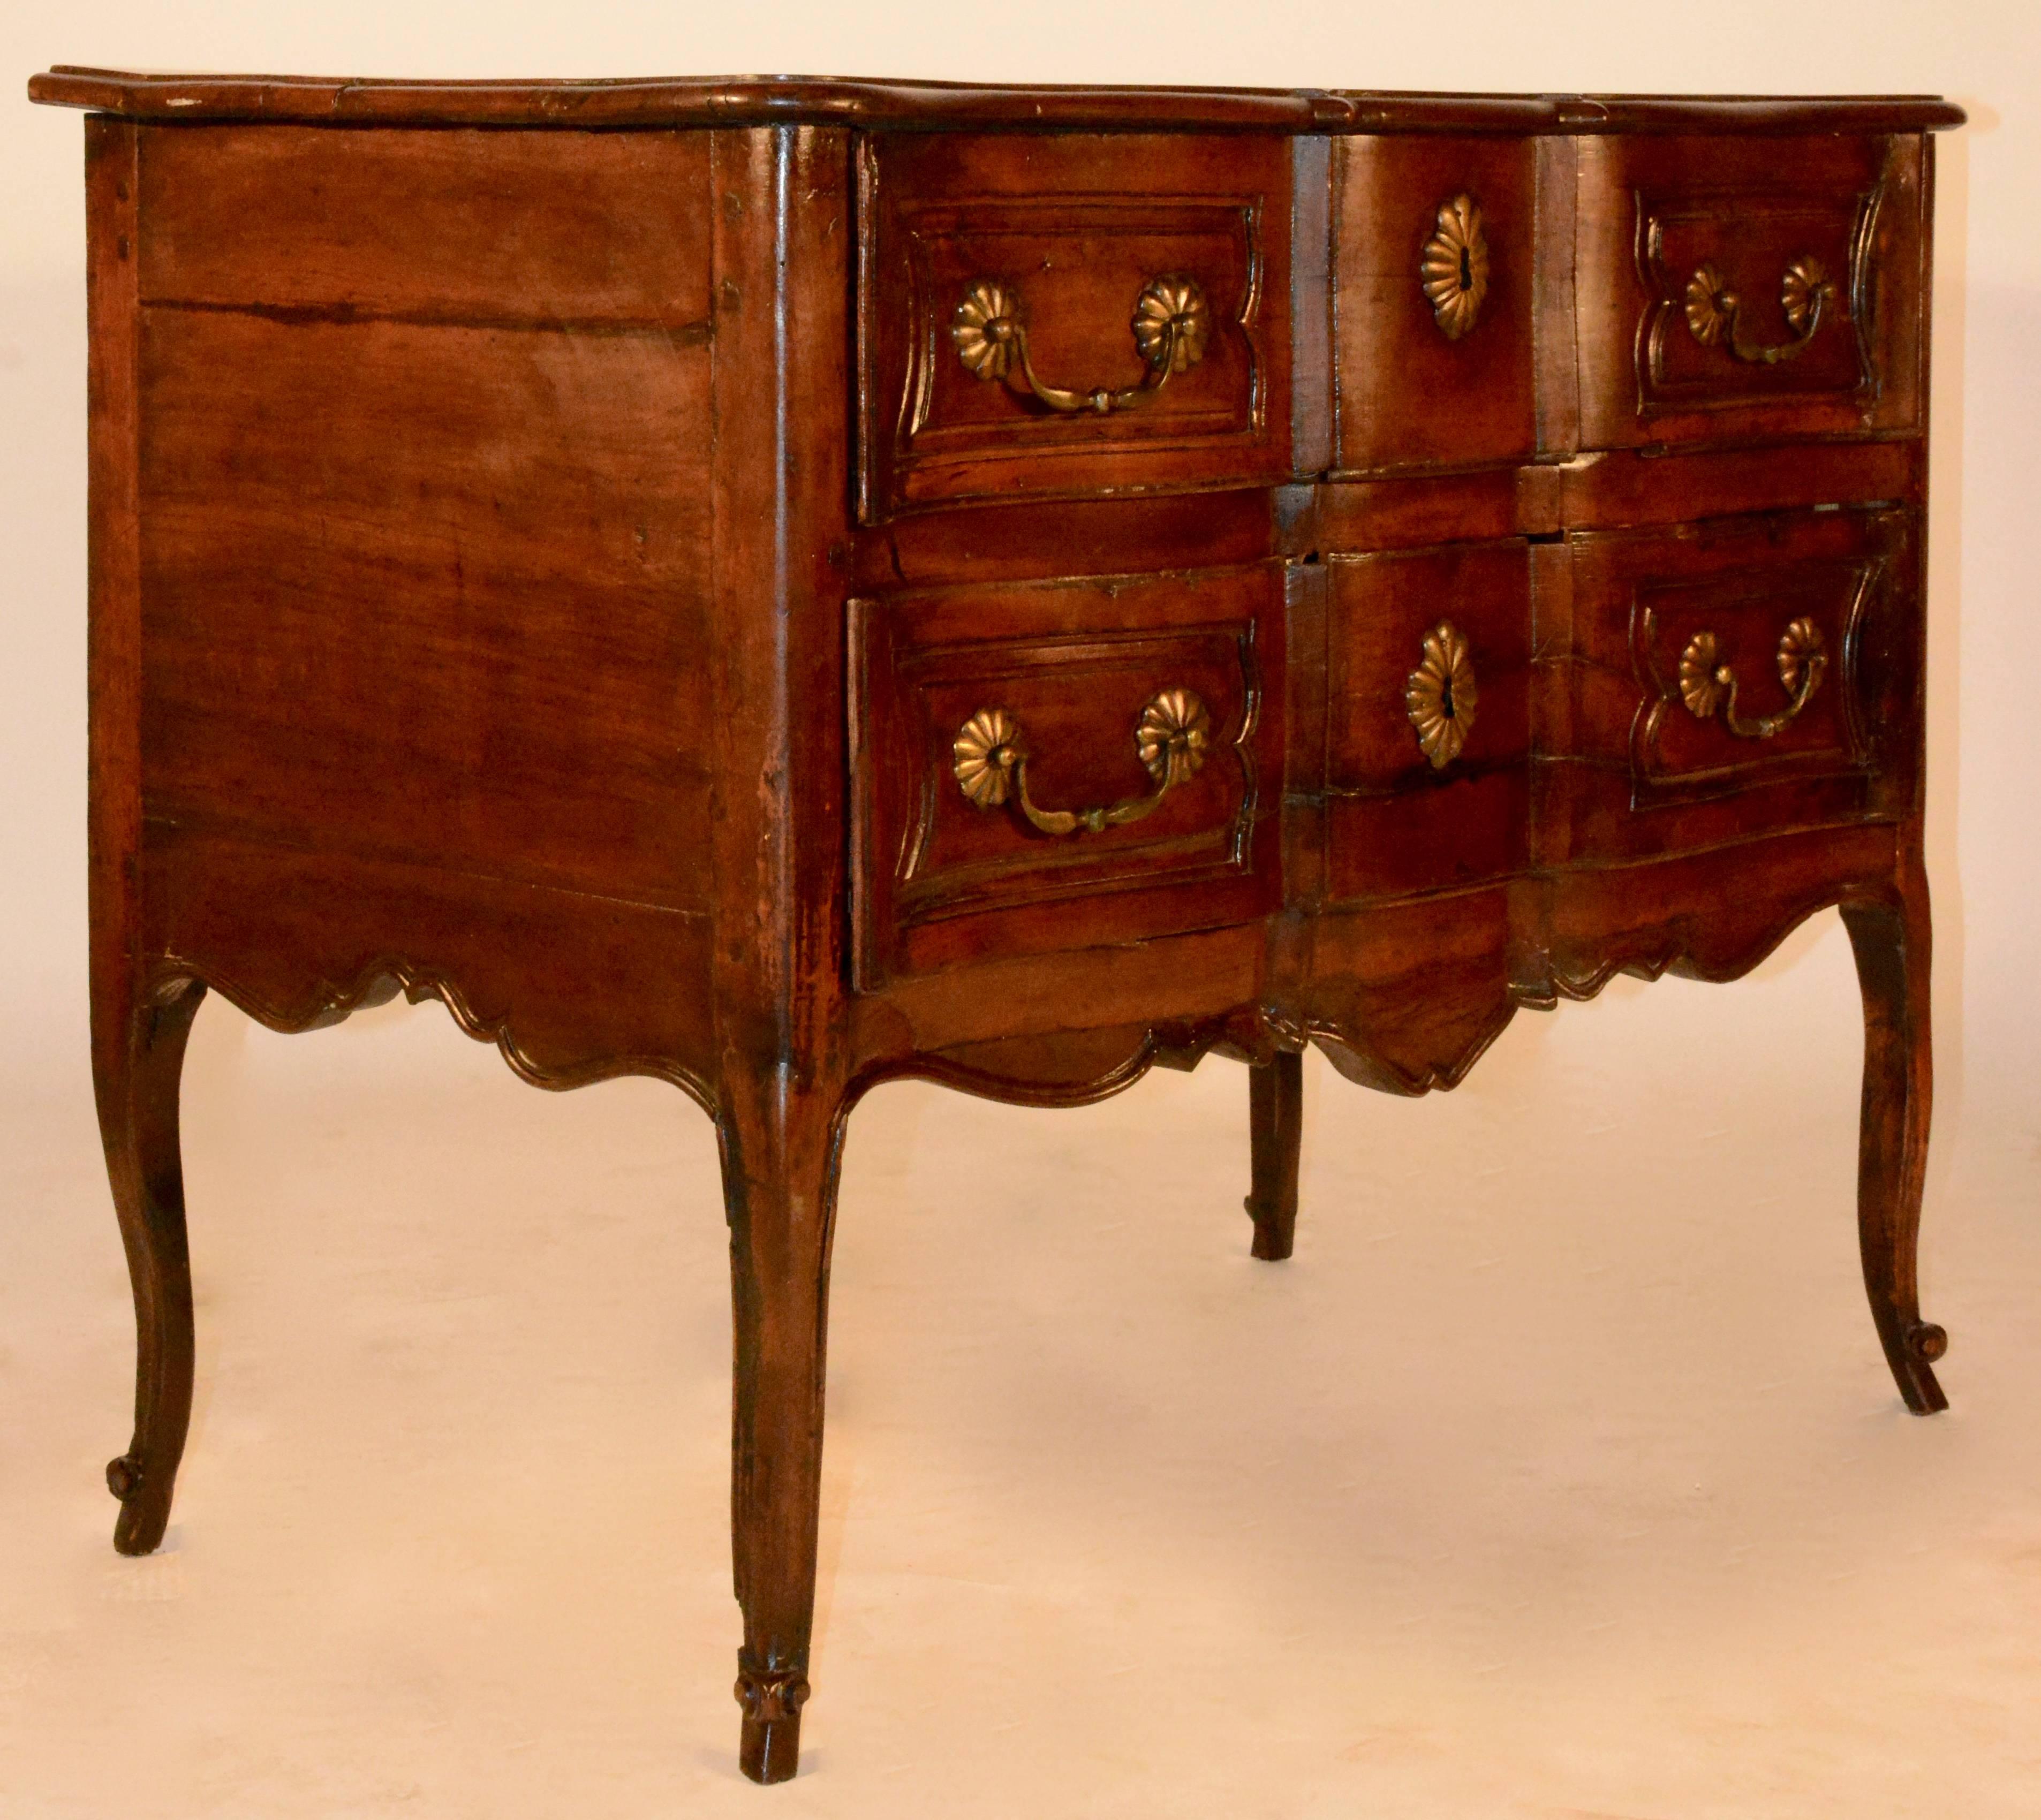 French Louise XV walnut serpentine front commode from the 18th century. This commode has heavy cast brass bail pulls and key escutcheons. Sits on beautiful cabriole legs with scrolled feet. Serpentine front that is beautifully handcrafted. All of